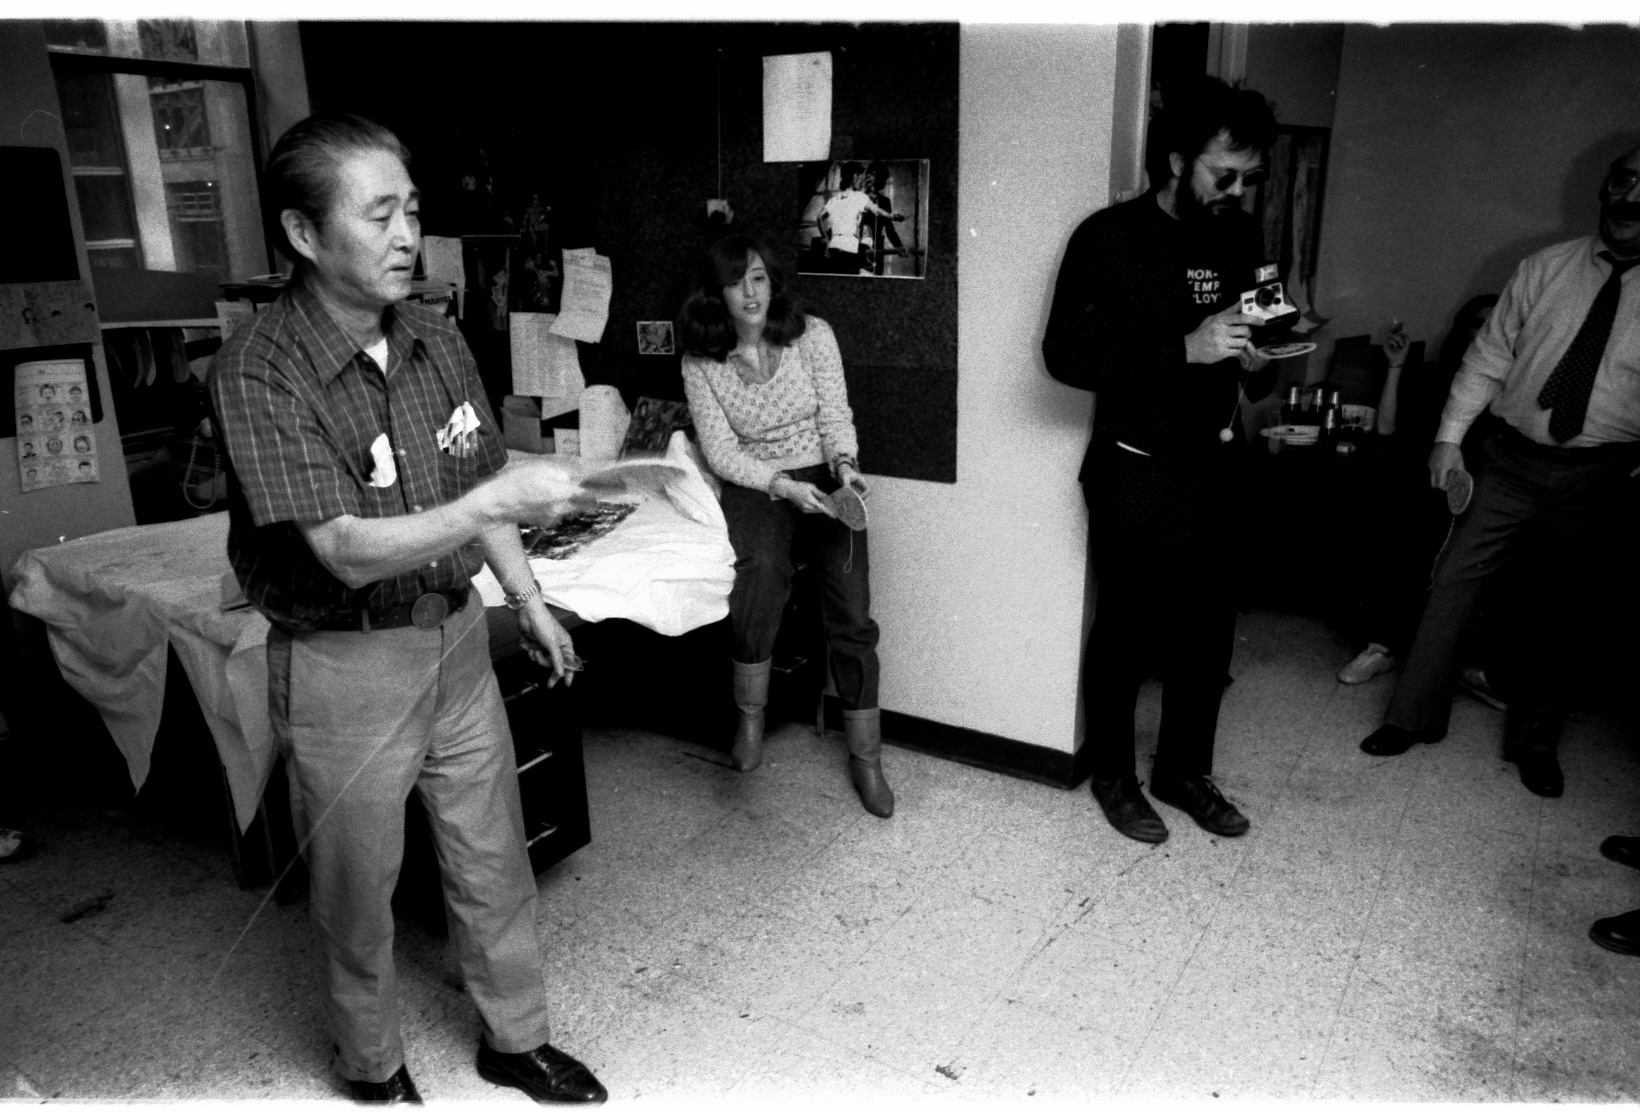 Morrie Kuramoto displaying the cool, calm collection that made him famous in the Marvel Bullpen. Rick Parker-- the Man in Black-- is holding a Polaroid instant print camera, but is not using it as those shots are expensive.